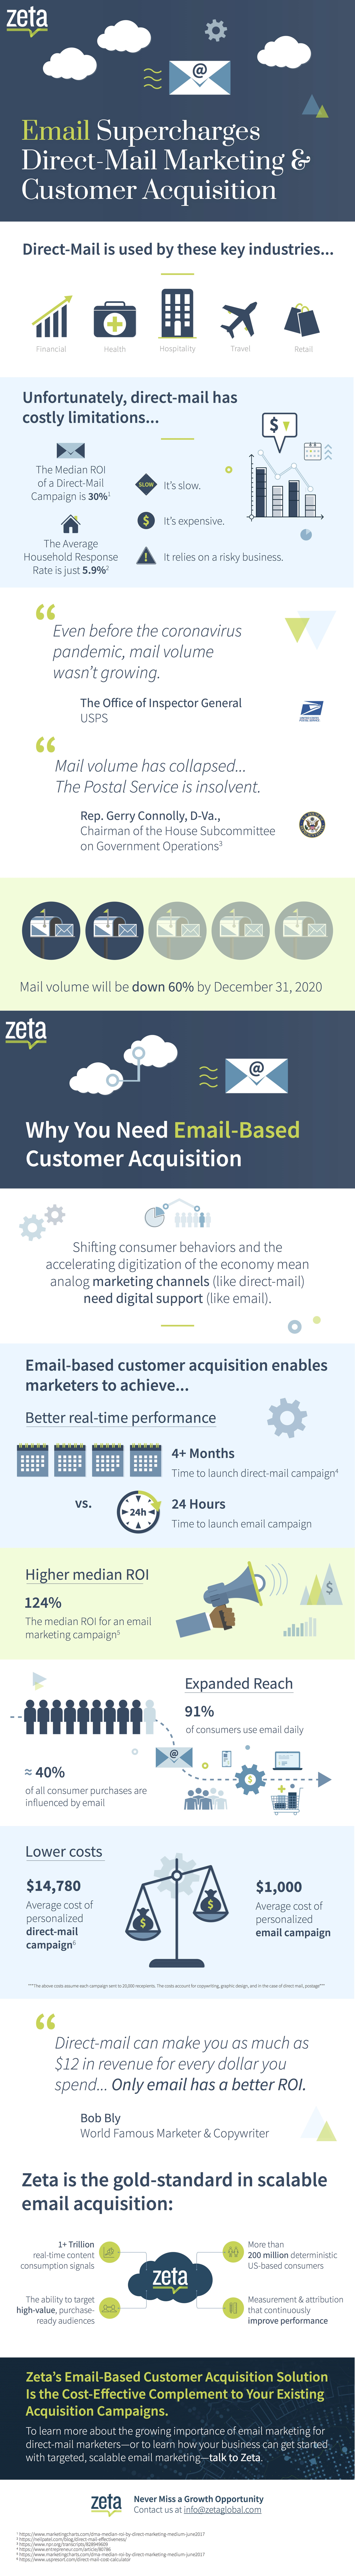 Direct-mail marketing infographic